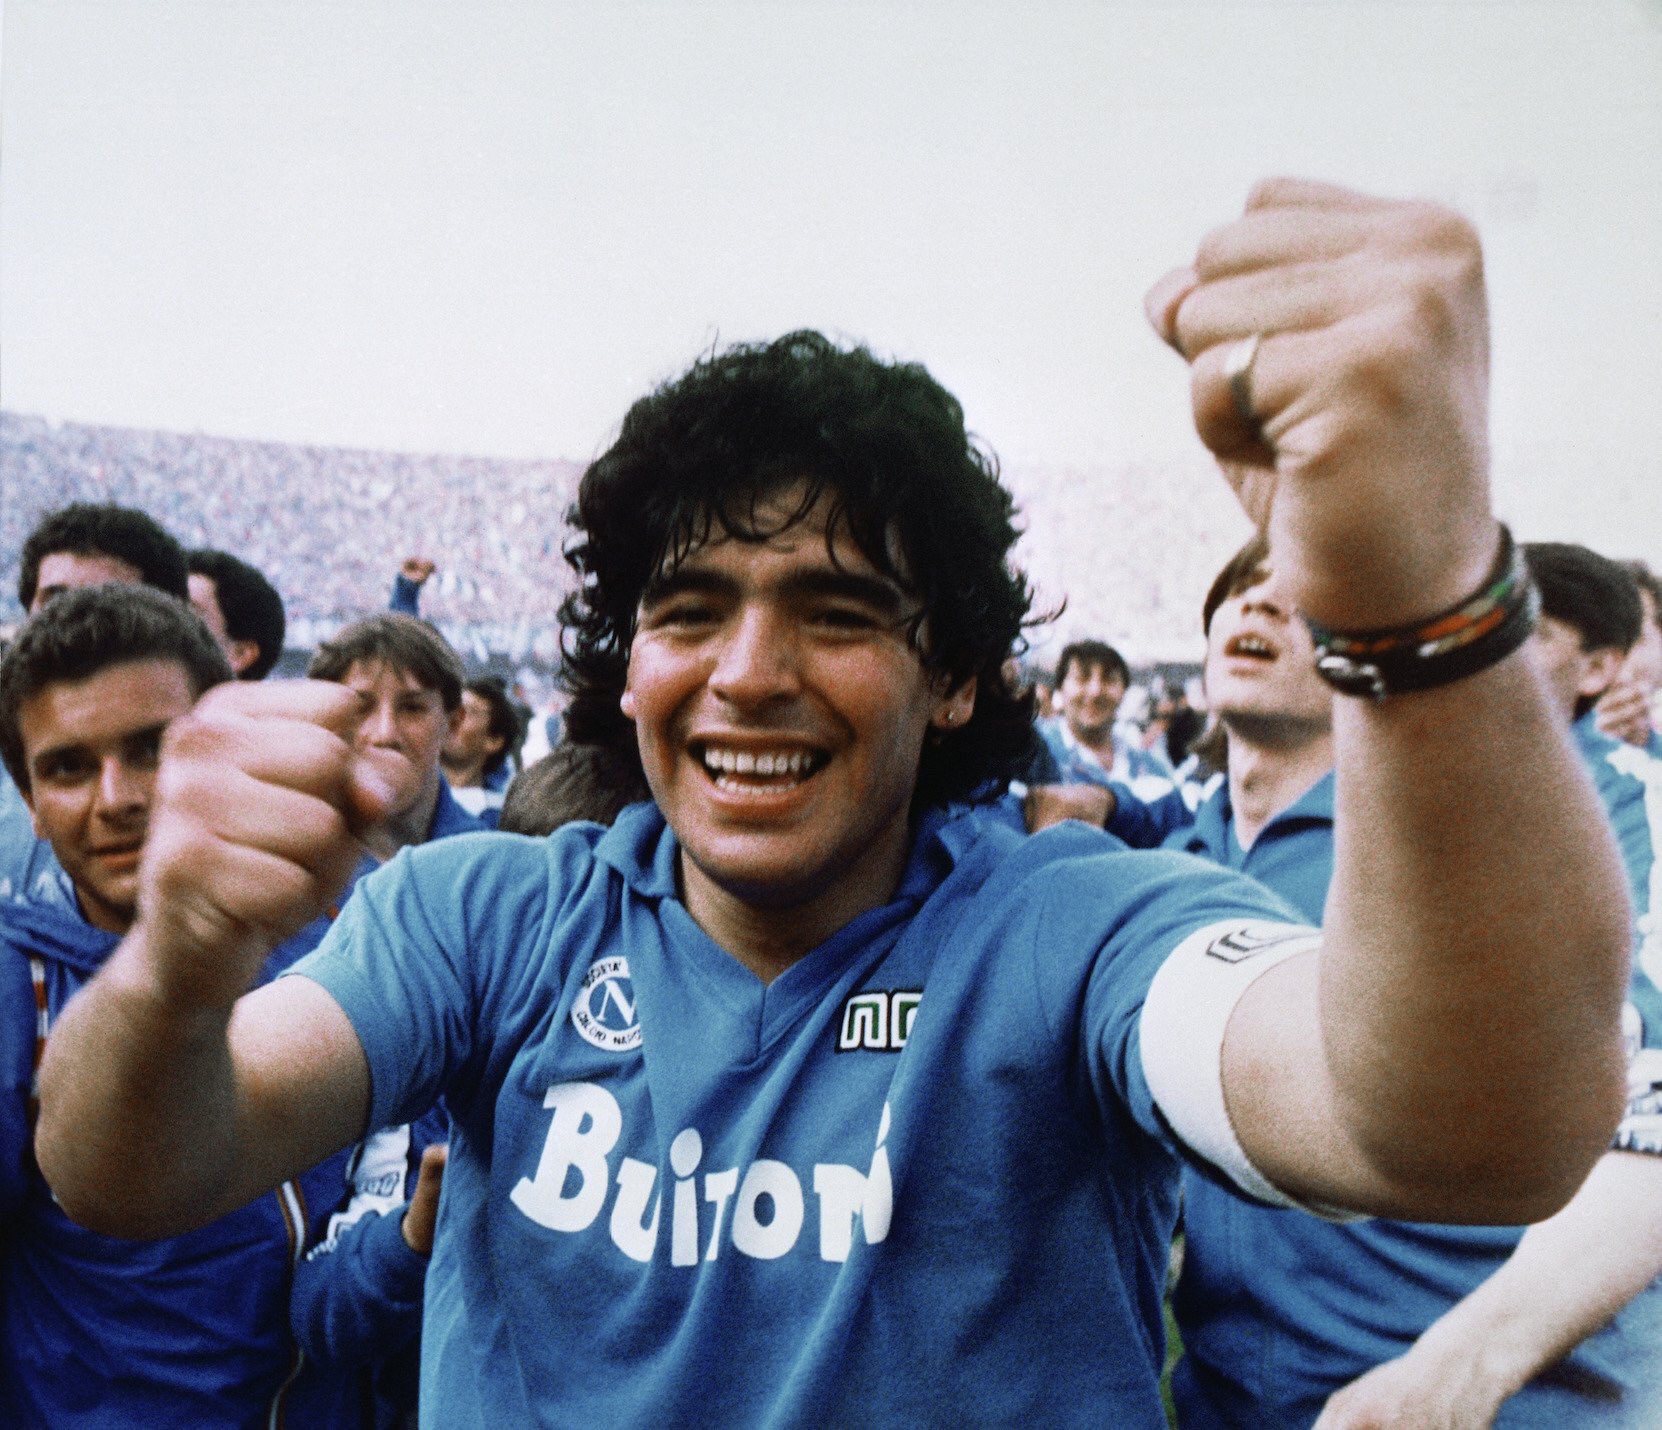 Happy 57th birthday to the greatest footballer of all time, Diego Armando 